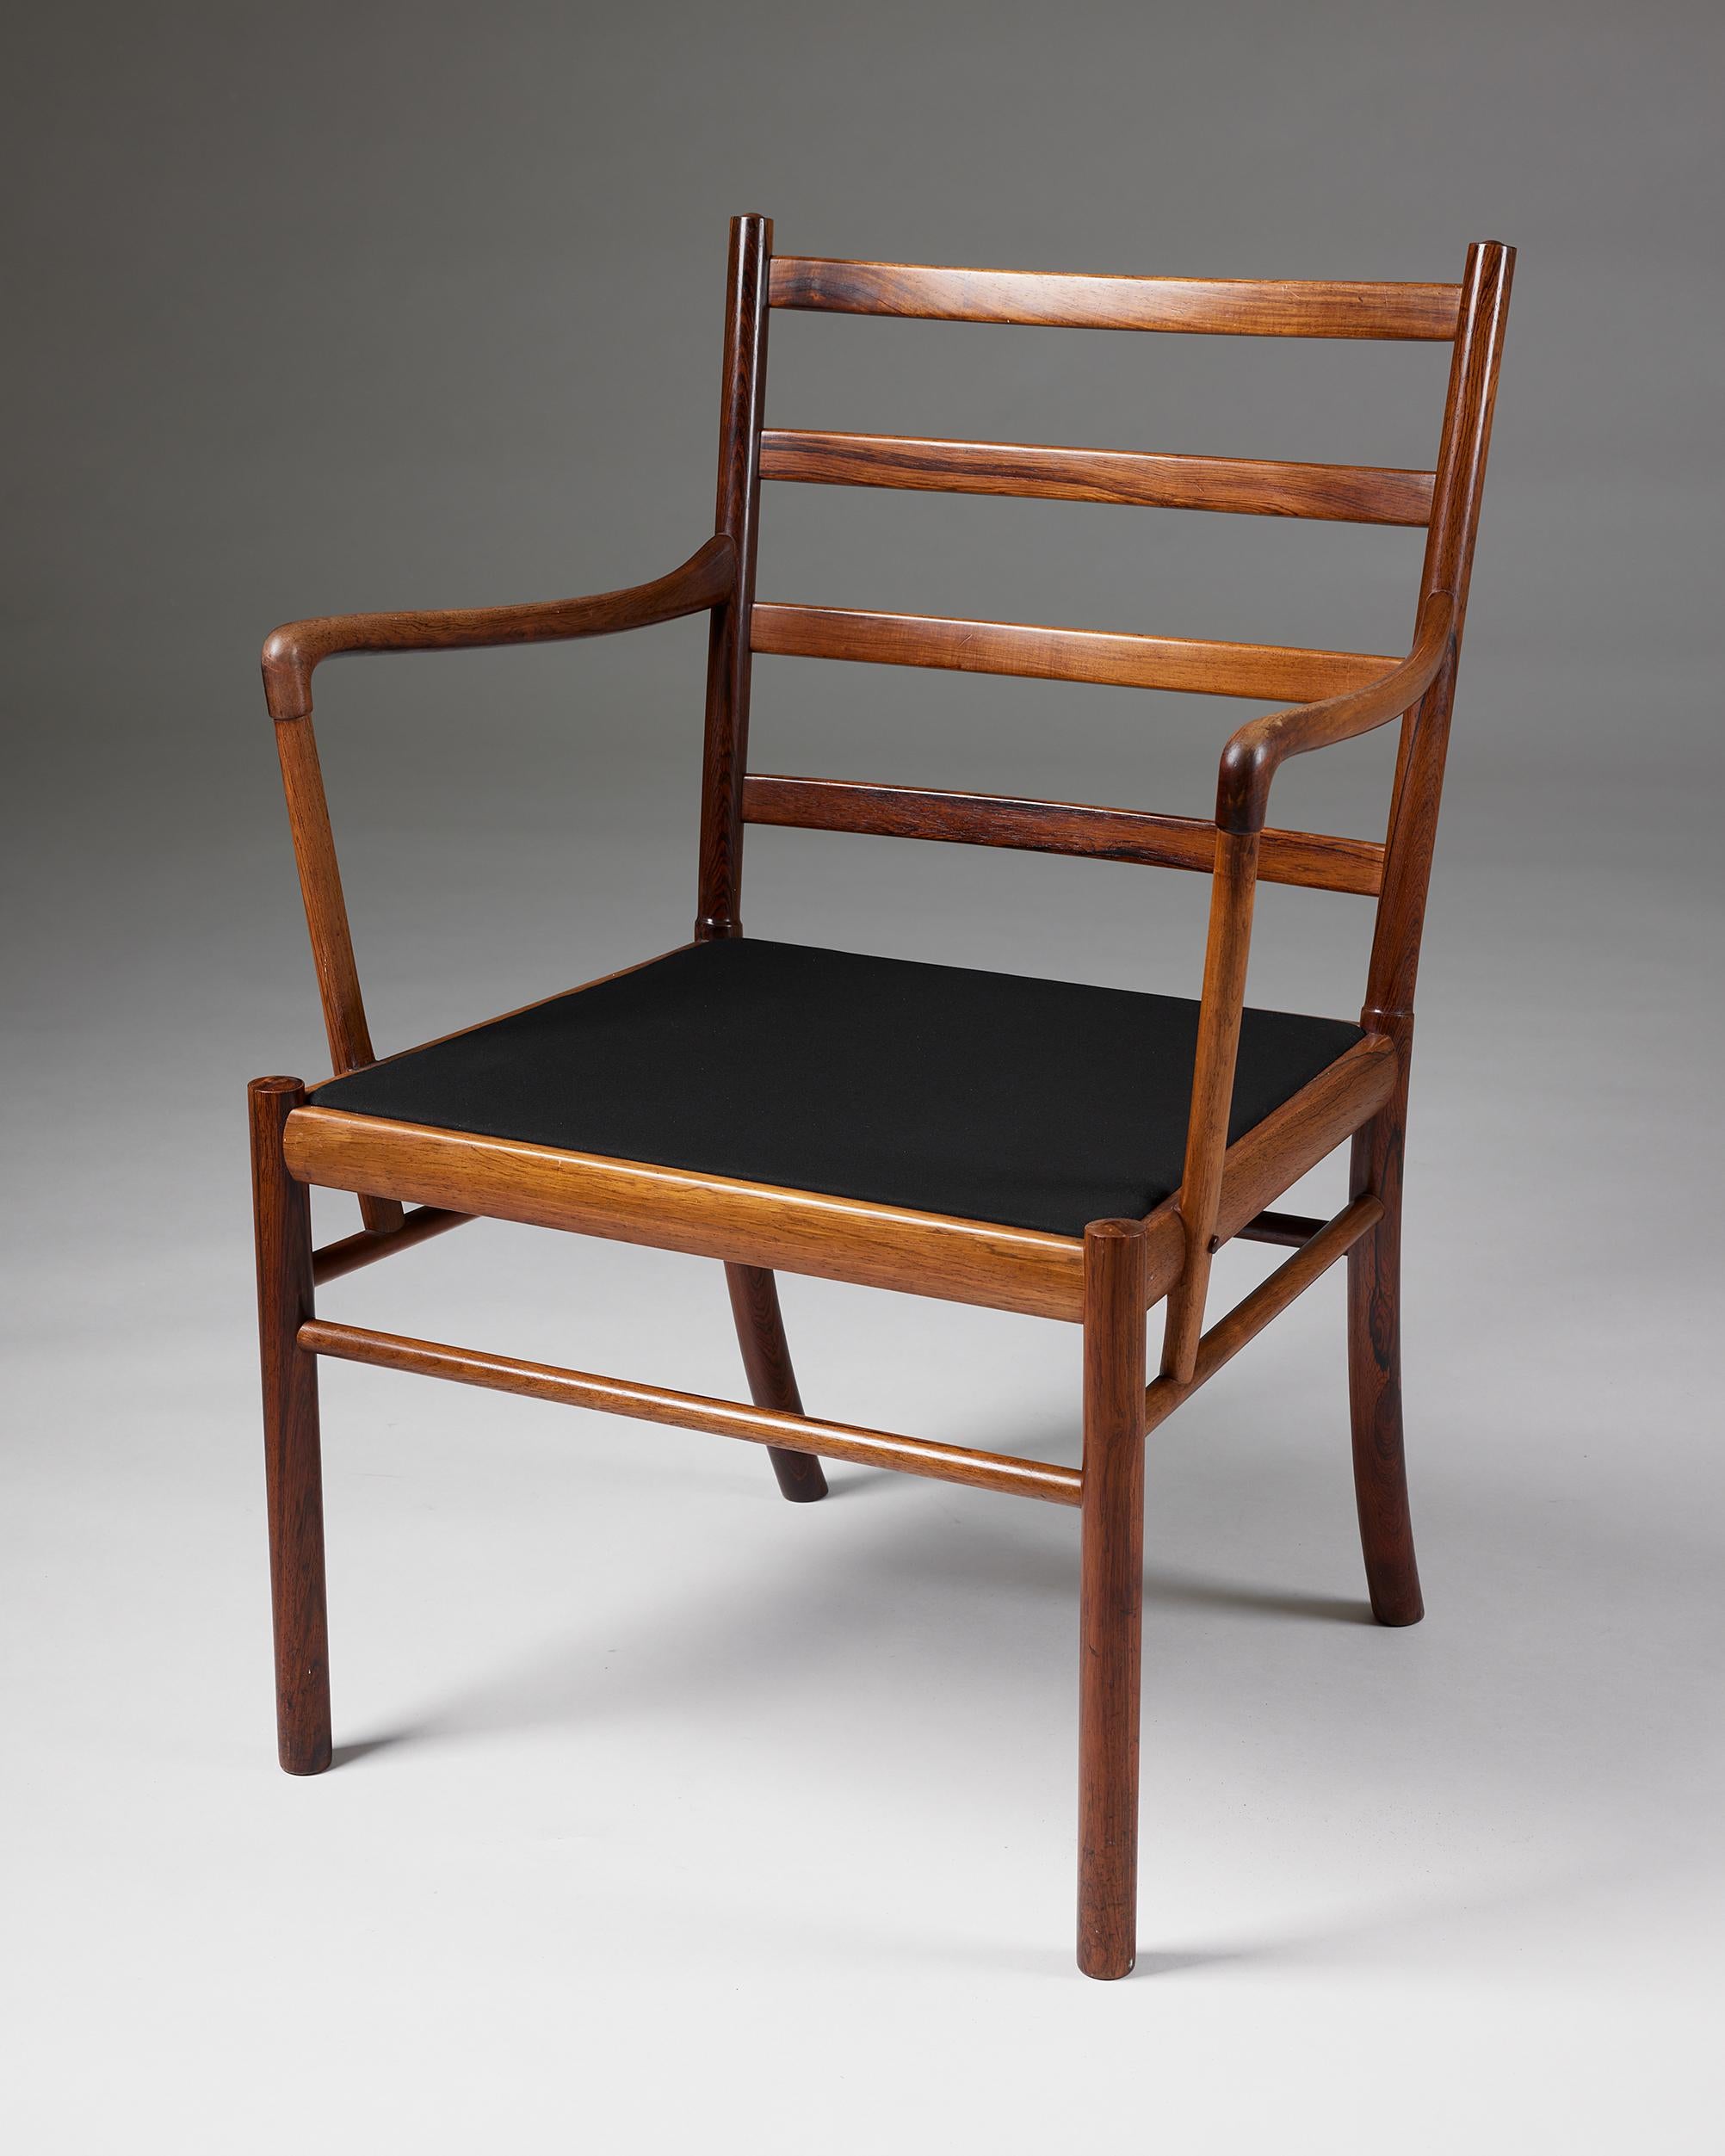 Armchair ‘Colonial’ Designed by Ole Wanscher for Poul Jeppesen 1